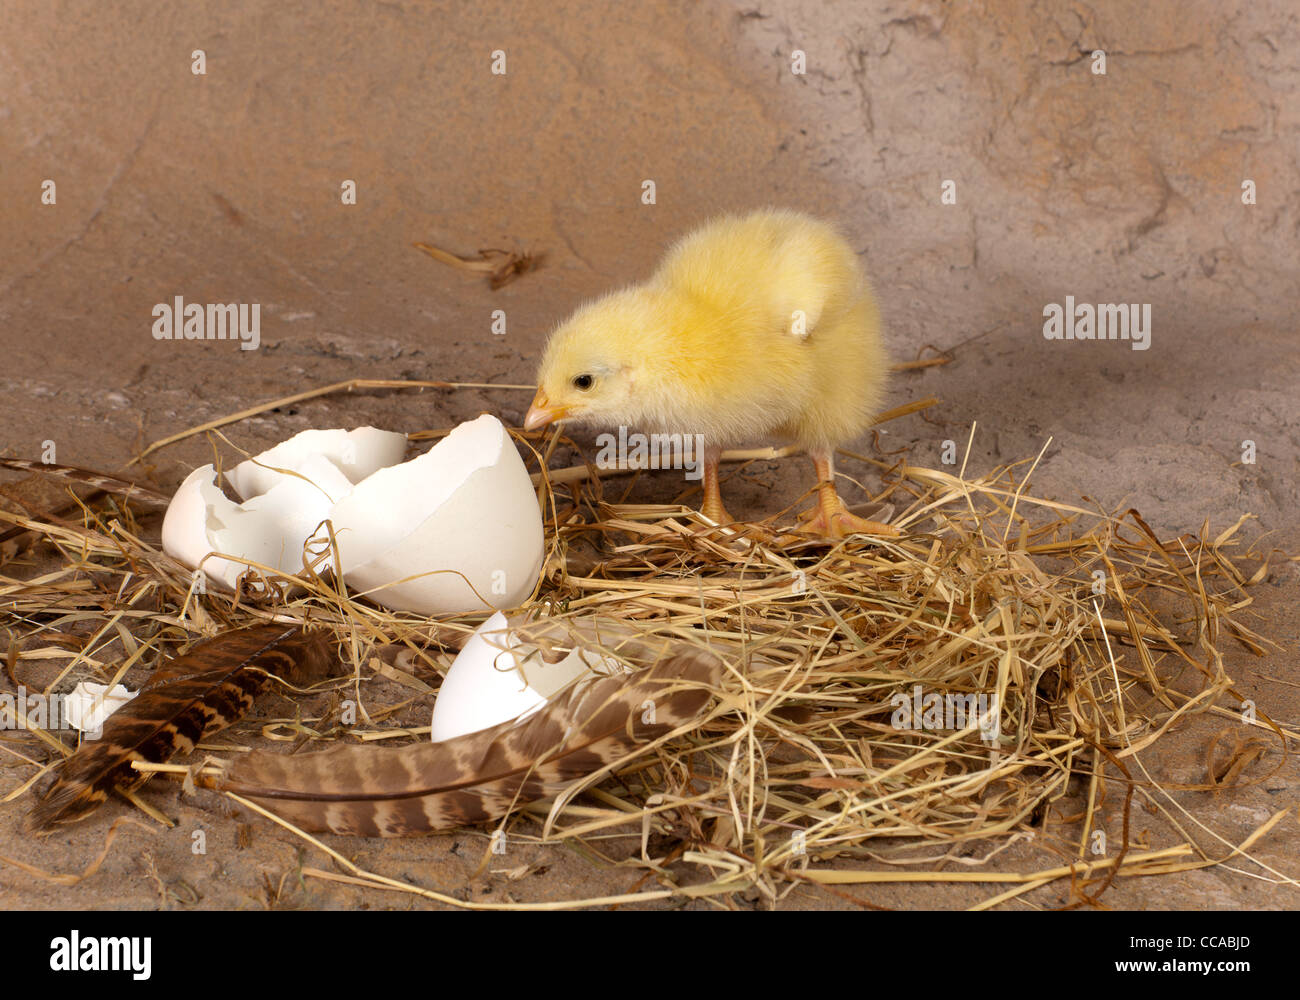 Nest of hay with yellow chick looking at its broken eggshell Stock Photo